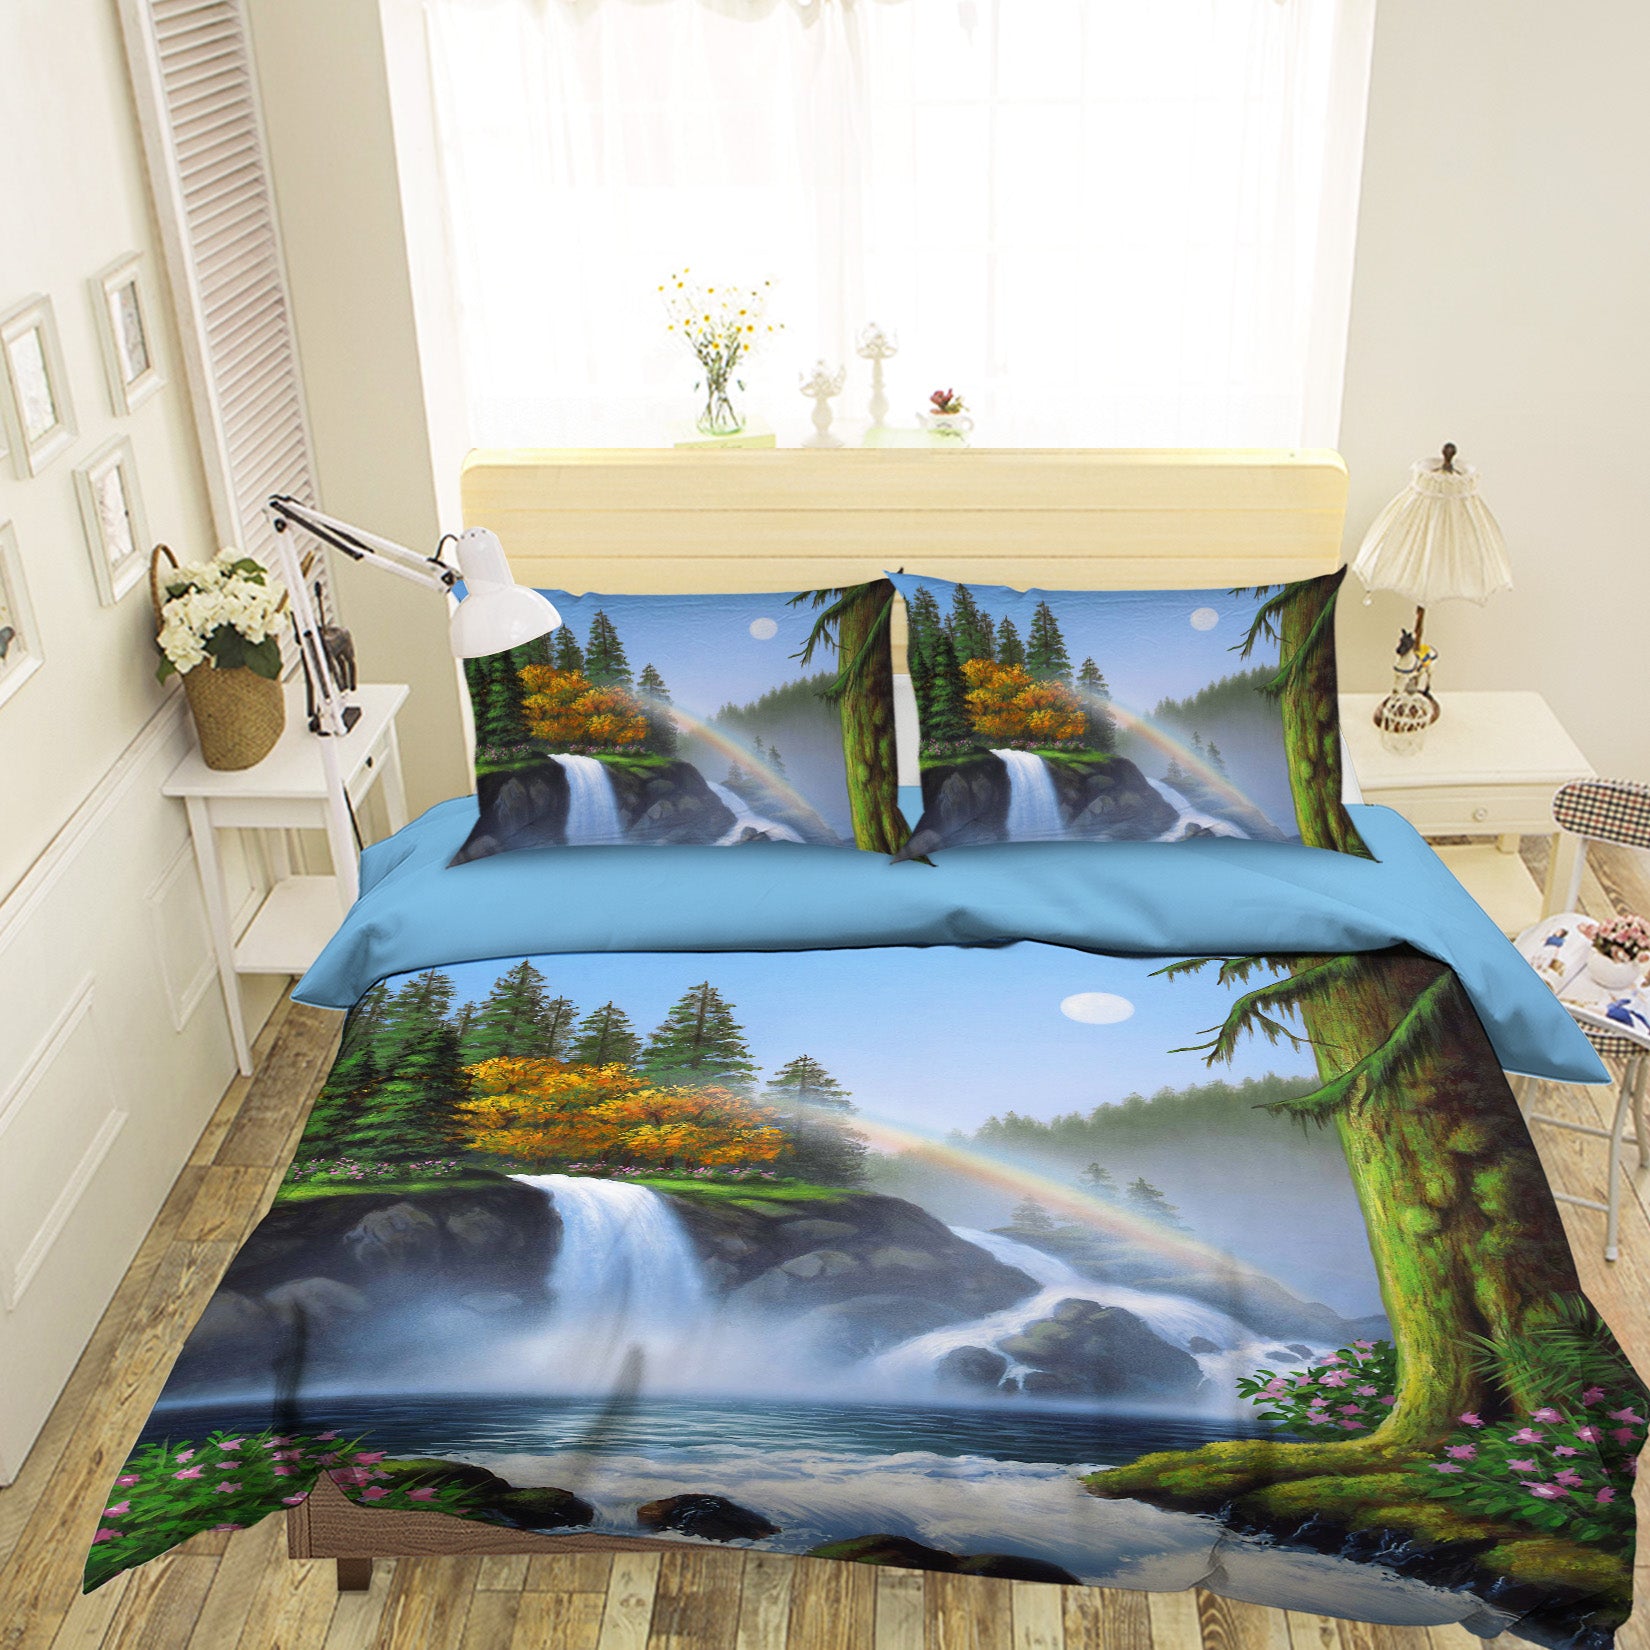 3D Waterfall 2136 Jerry LoFaro bedding Bed Pillowcases Quilt